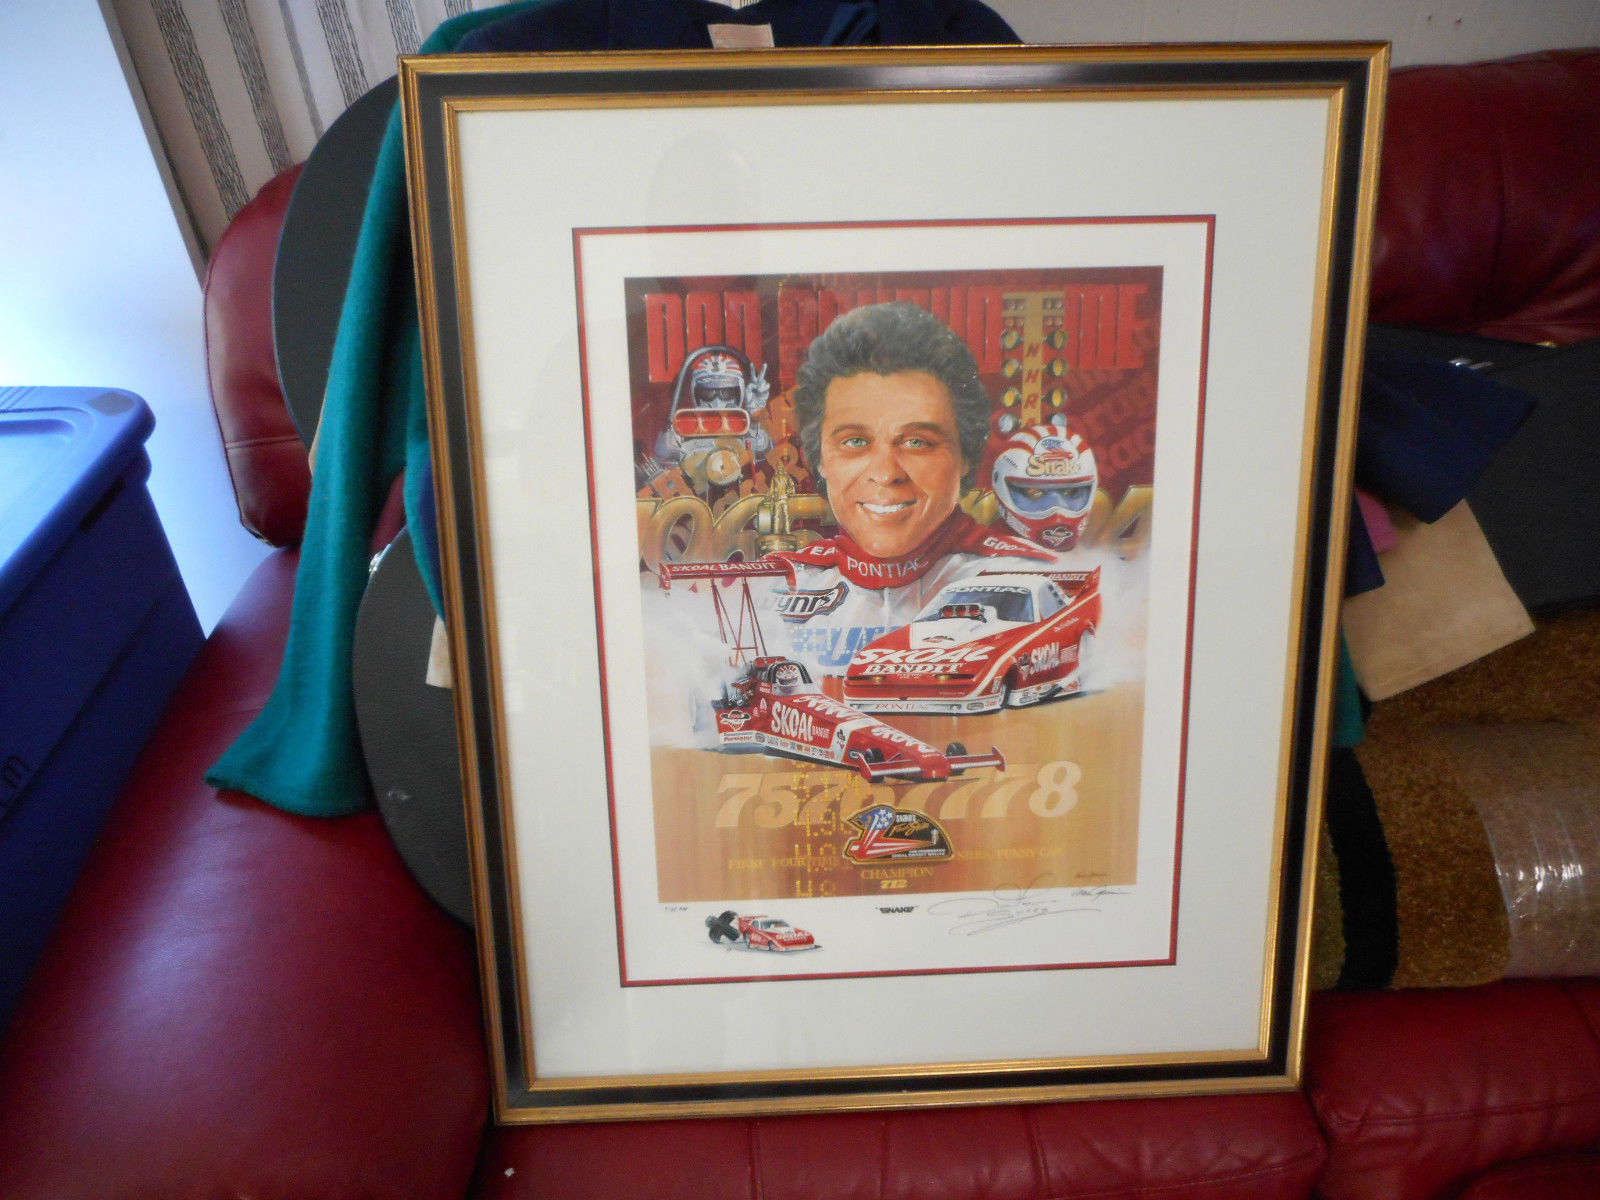 DON "THE SNAKE" PRUDHOMME LITHOGRAPH, 1 0F 25 REMARQUED PRINTS, COA